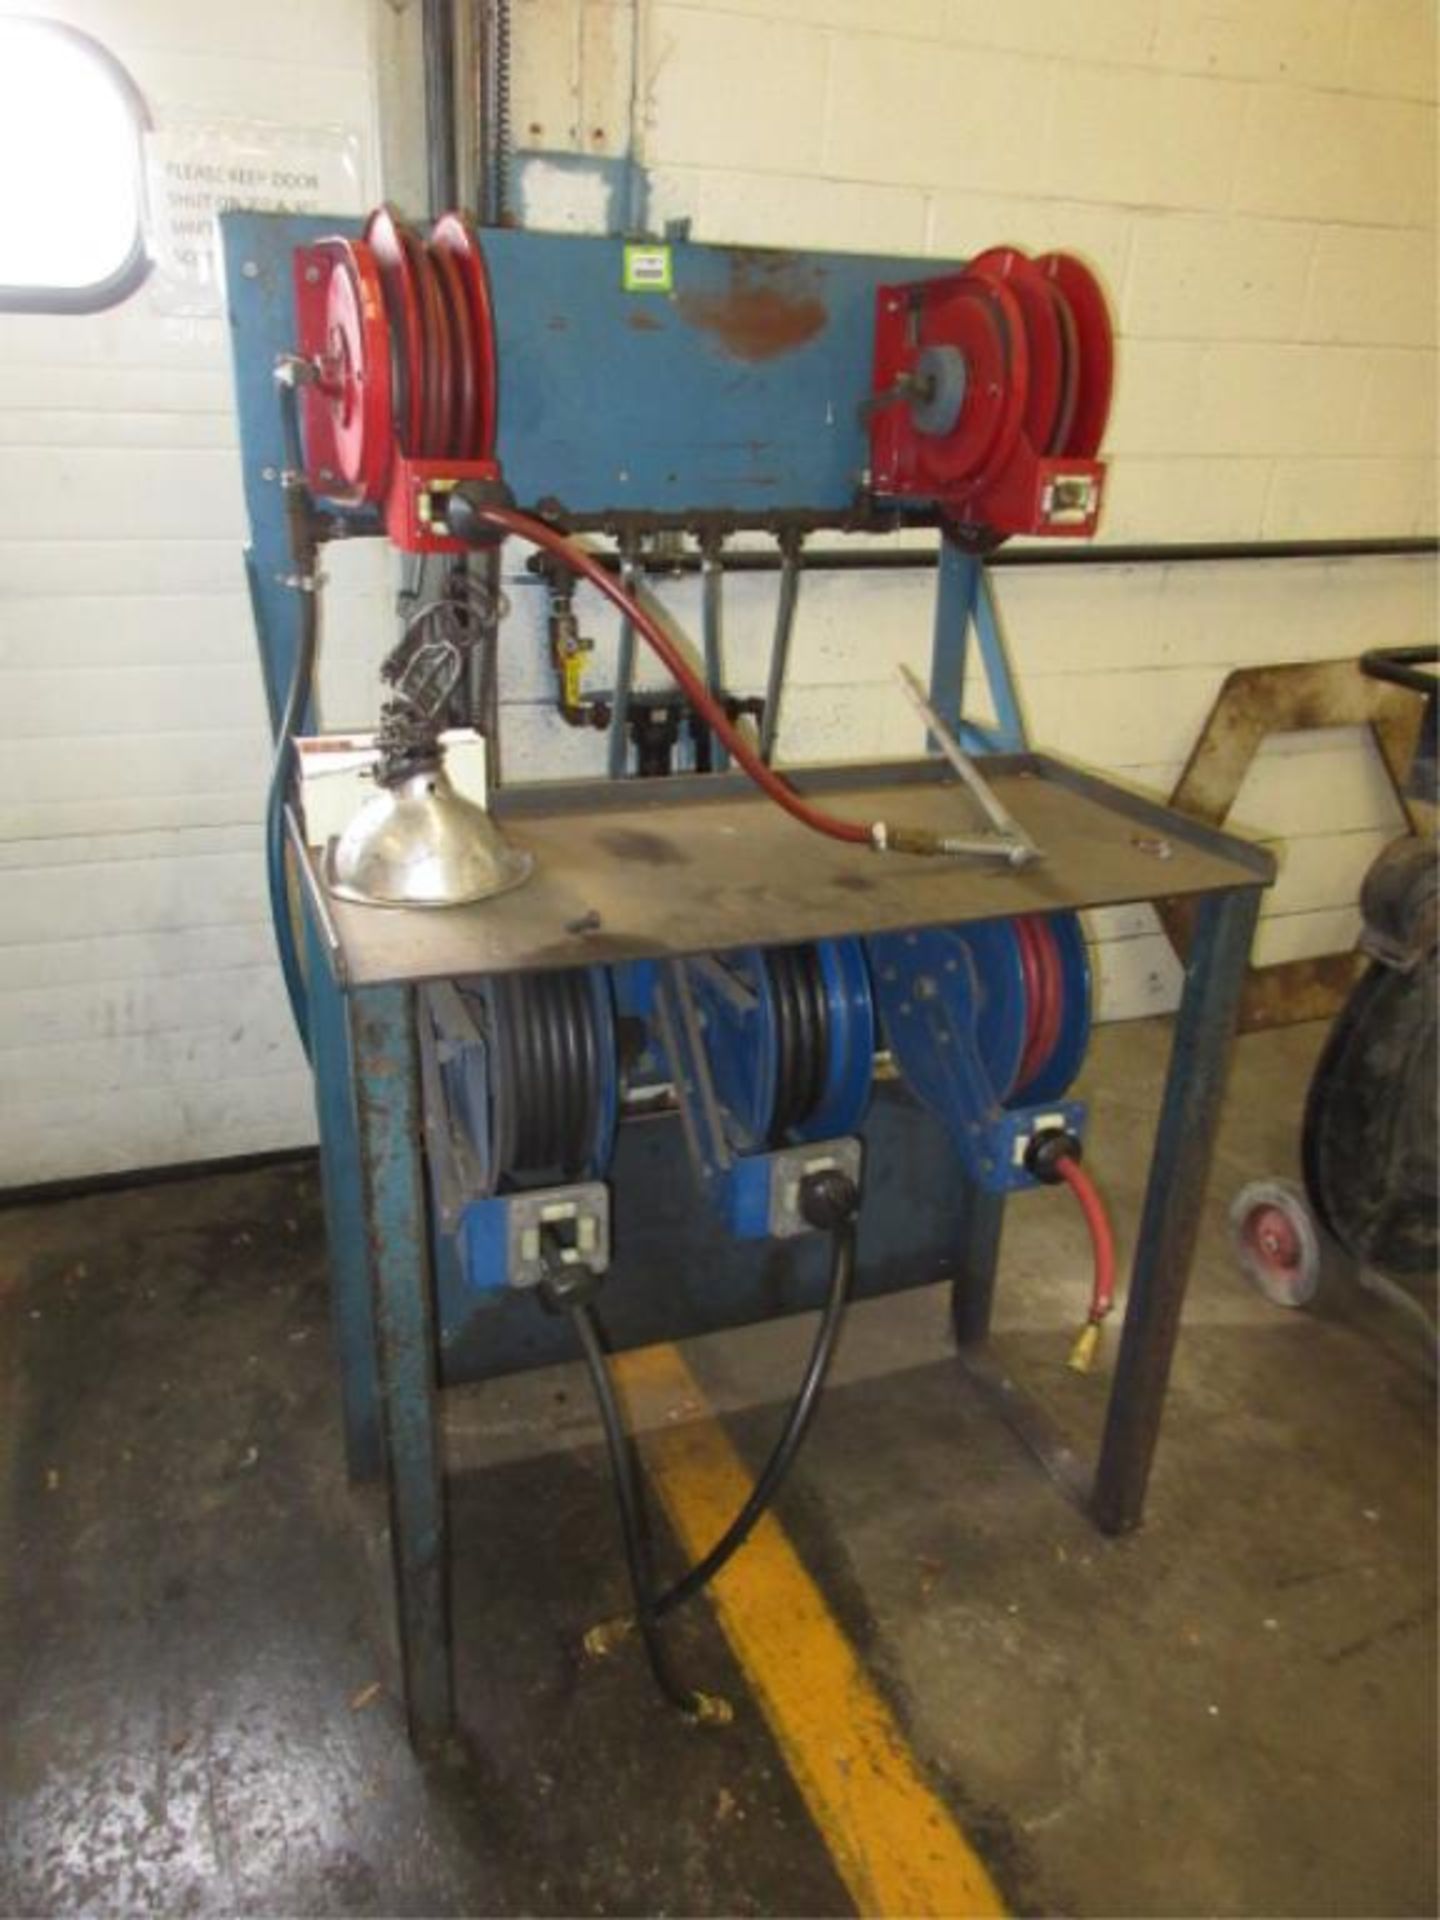 Hose Reel Stand. Air Hose Reel Stand, includes (5) retractable air reels. HIT# 2179021. Loc: main